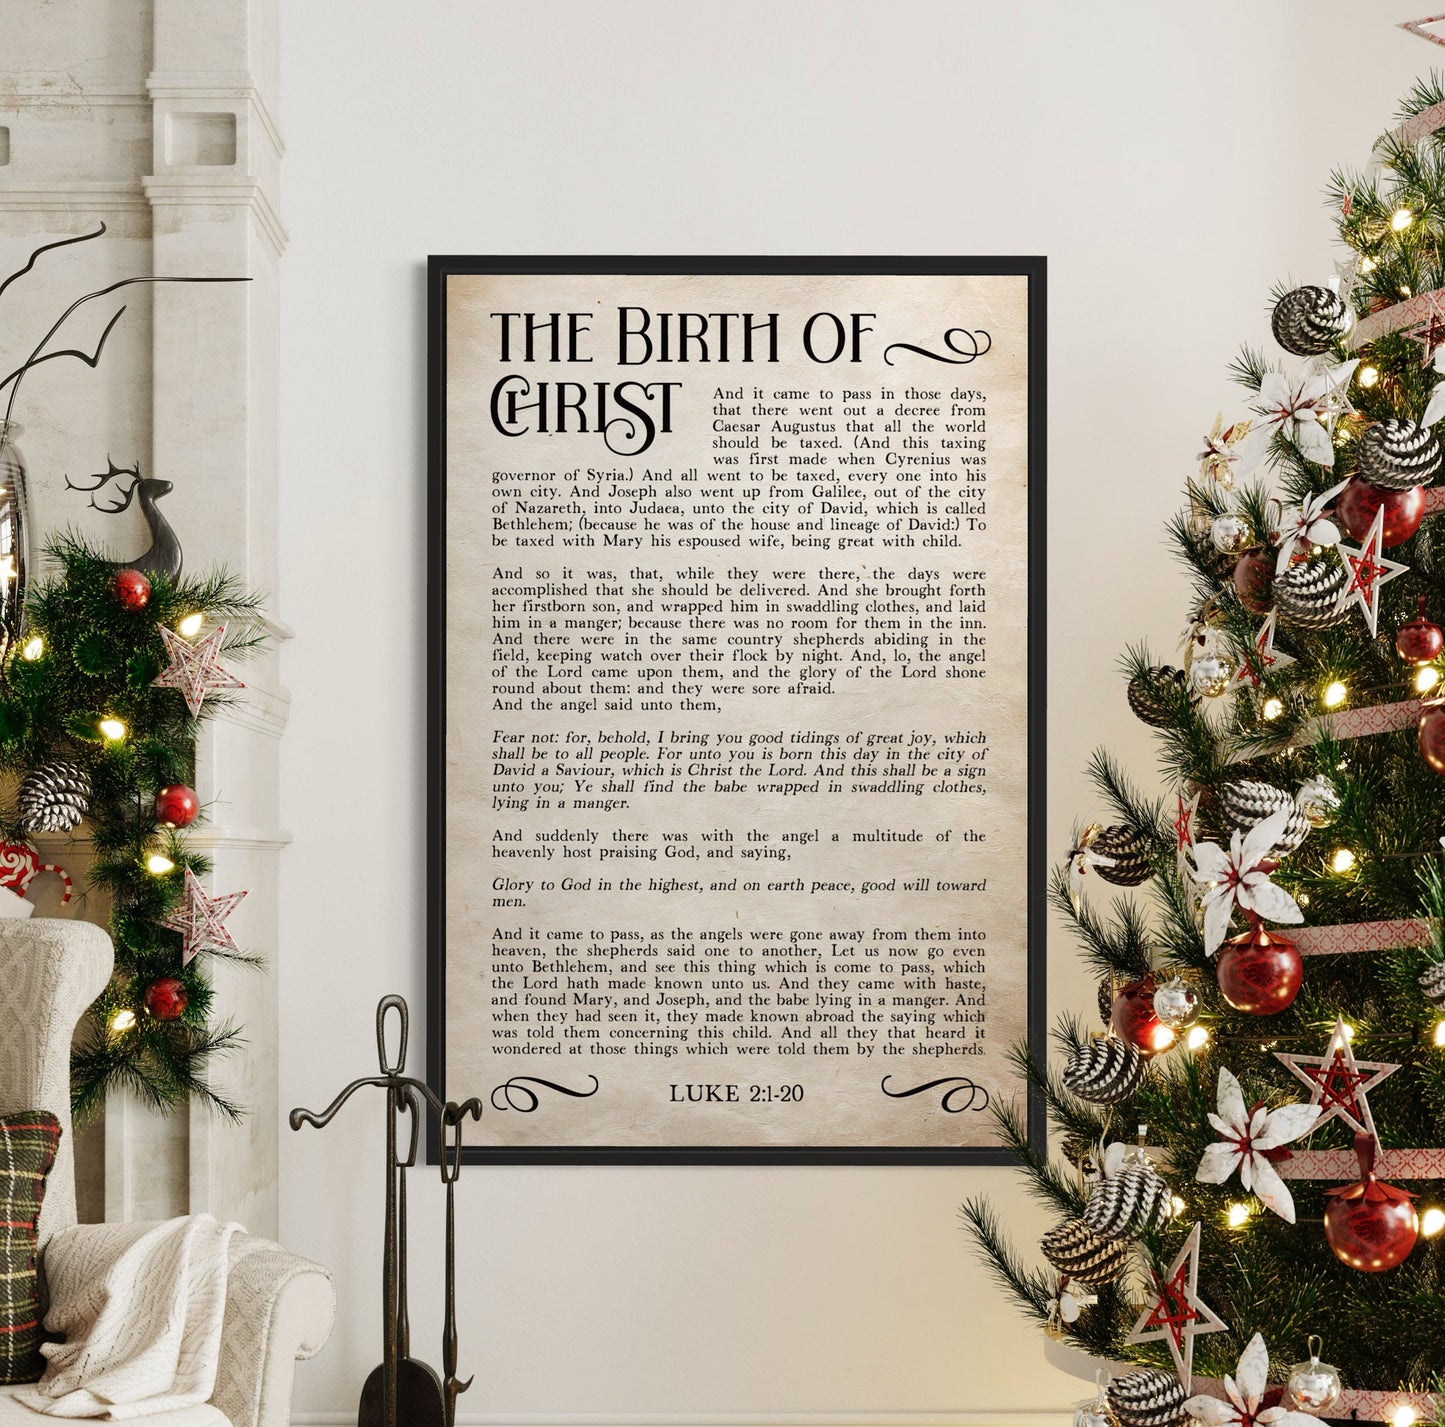 The birth of Christ, Christmas Story, Luke 2:1-20, framed canvas or canvas wrap